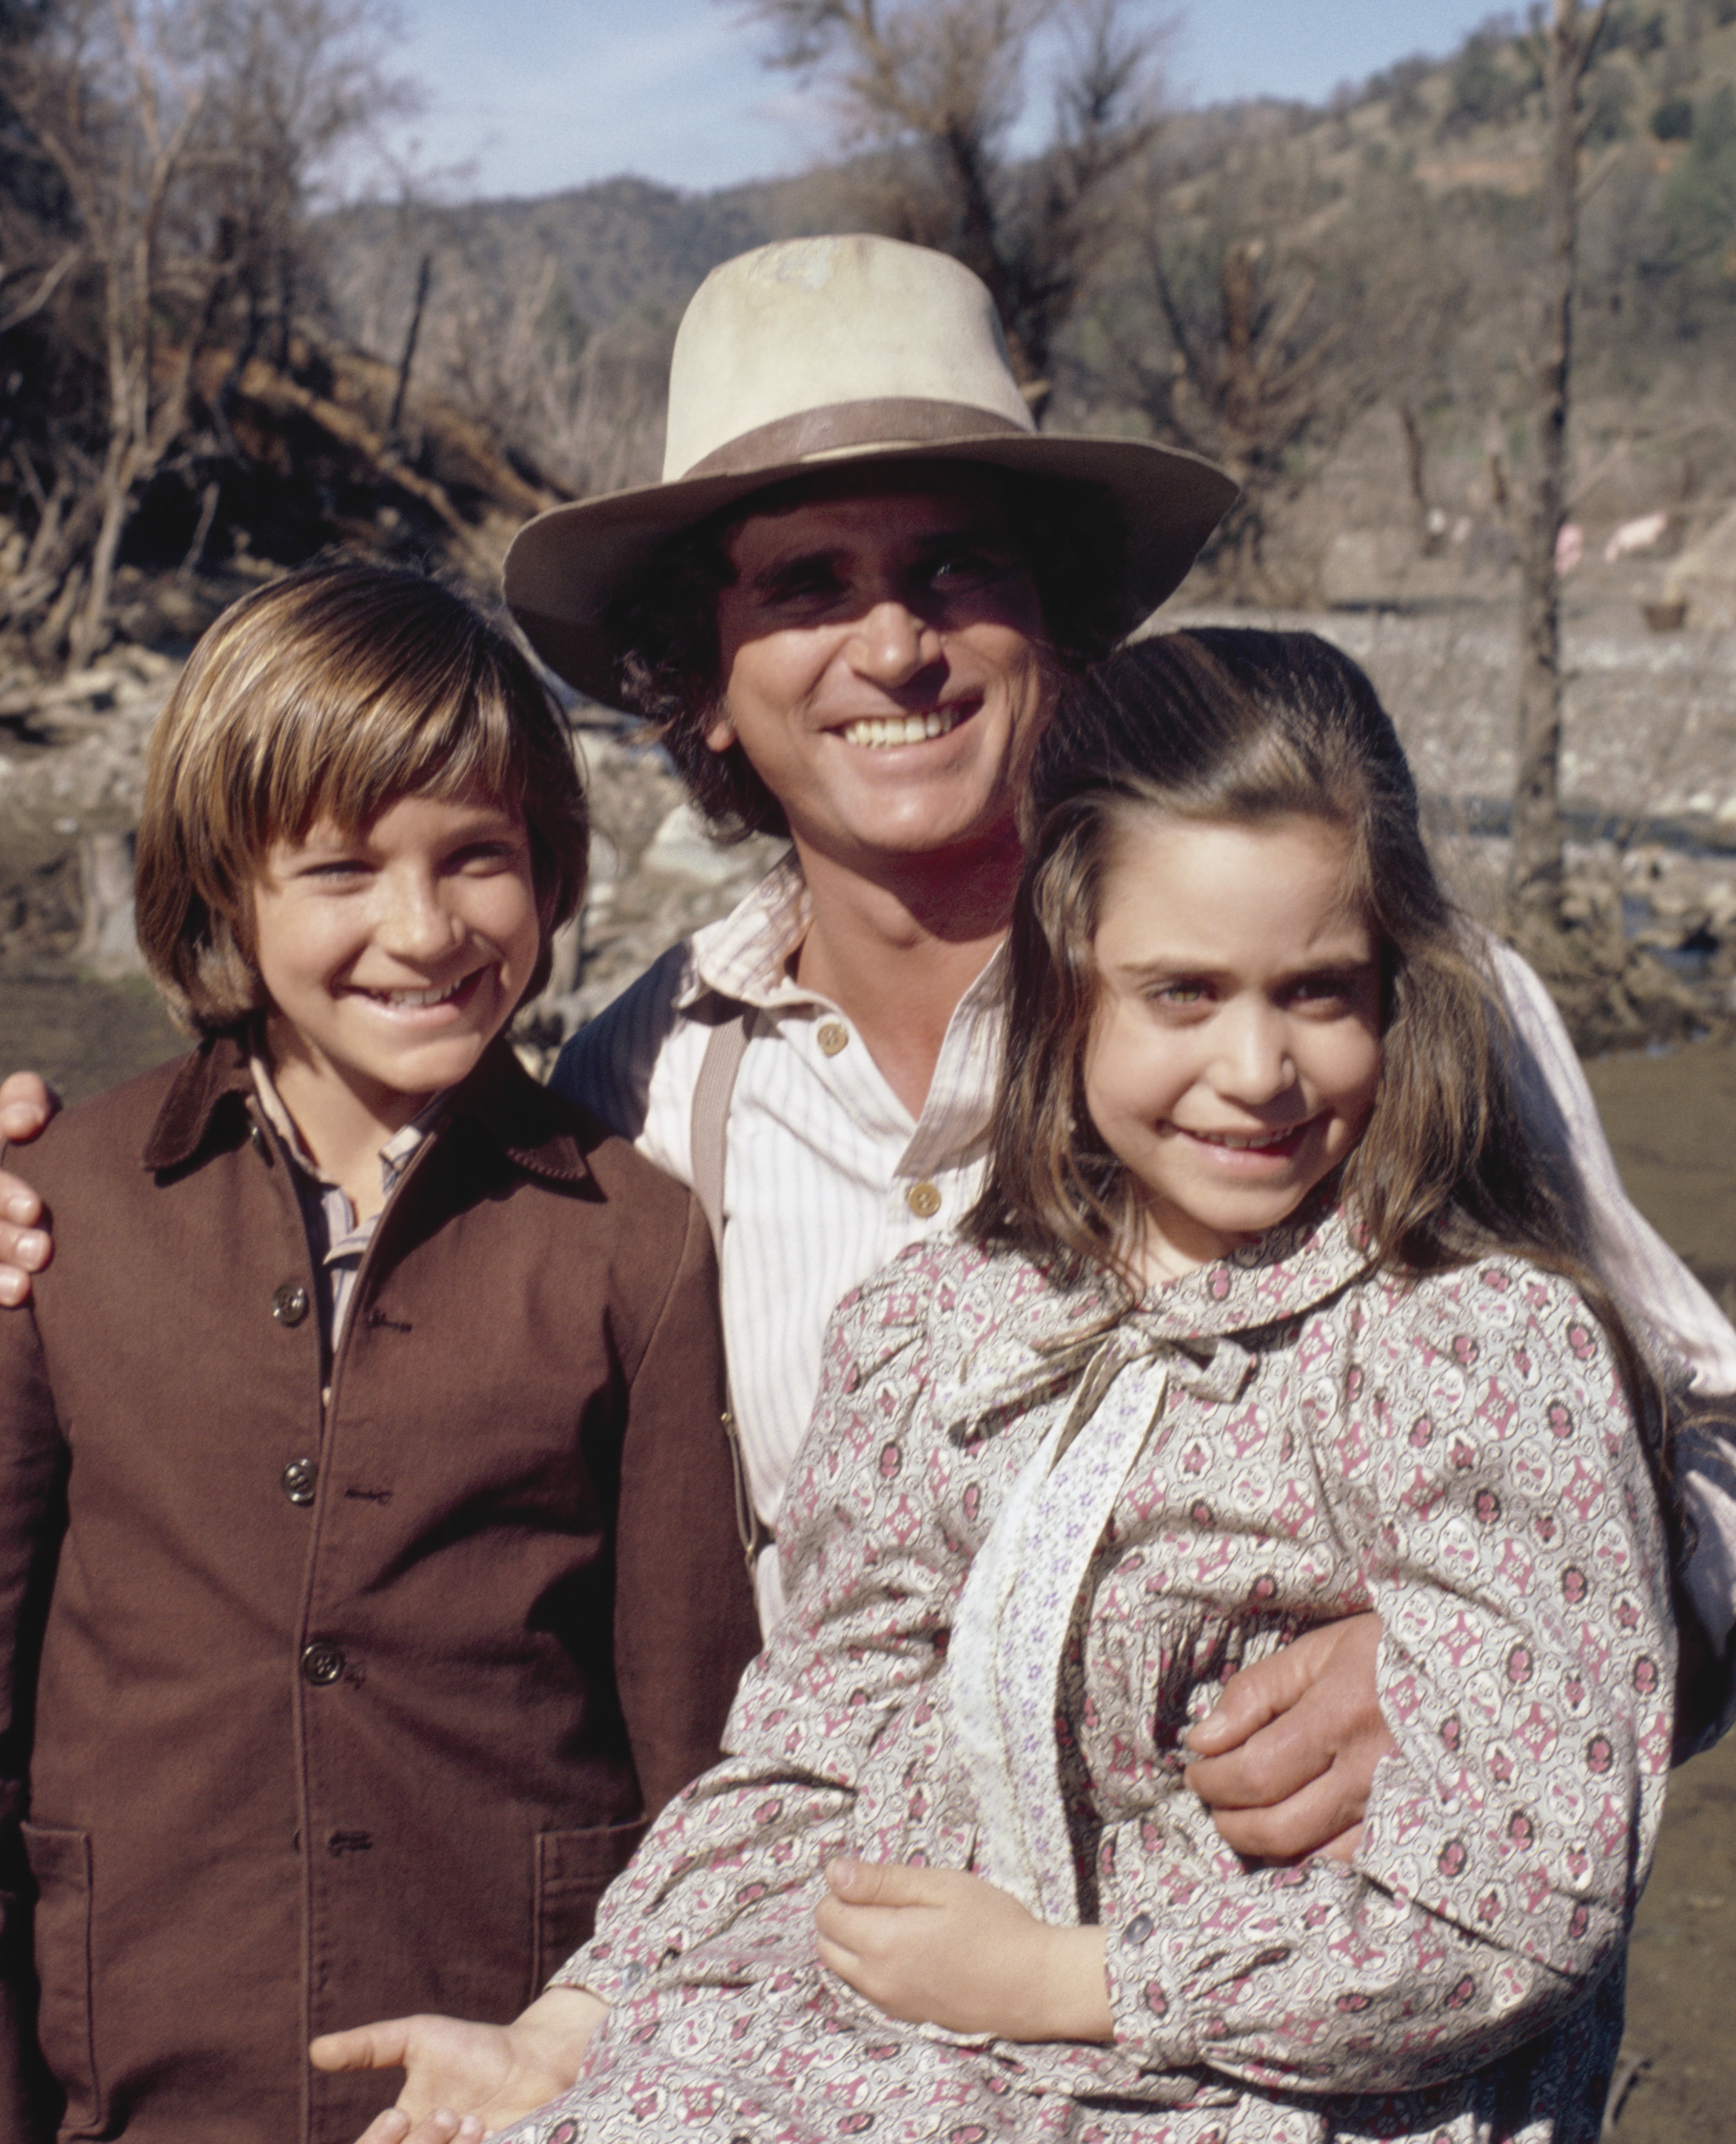 Jason Bateman as James Cooper Ingalls, Michael Landon as Charles Philip Ingalls, and Melissa Francis as Cassandra Cooper Ingalls, as seen on "Little House on the Prairie." | Source: Getty Images